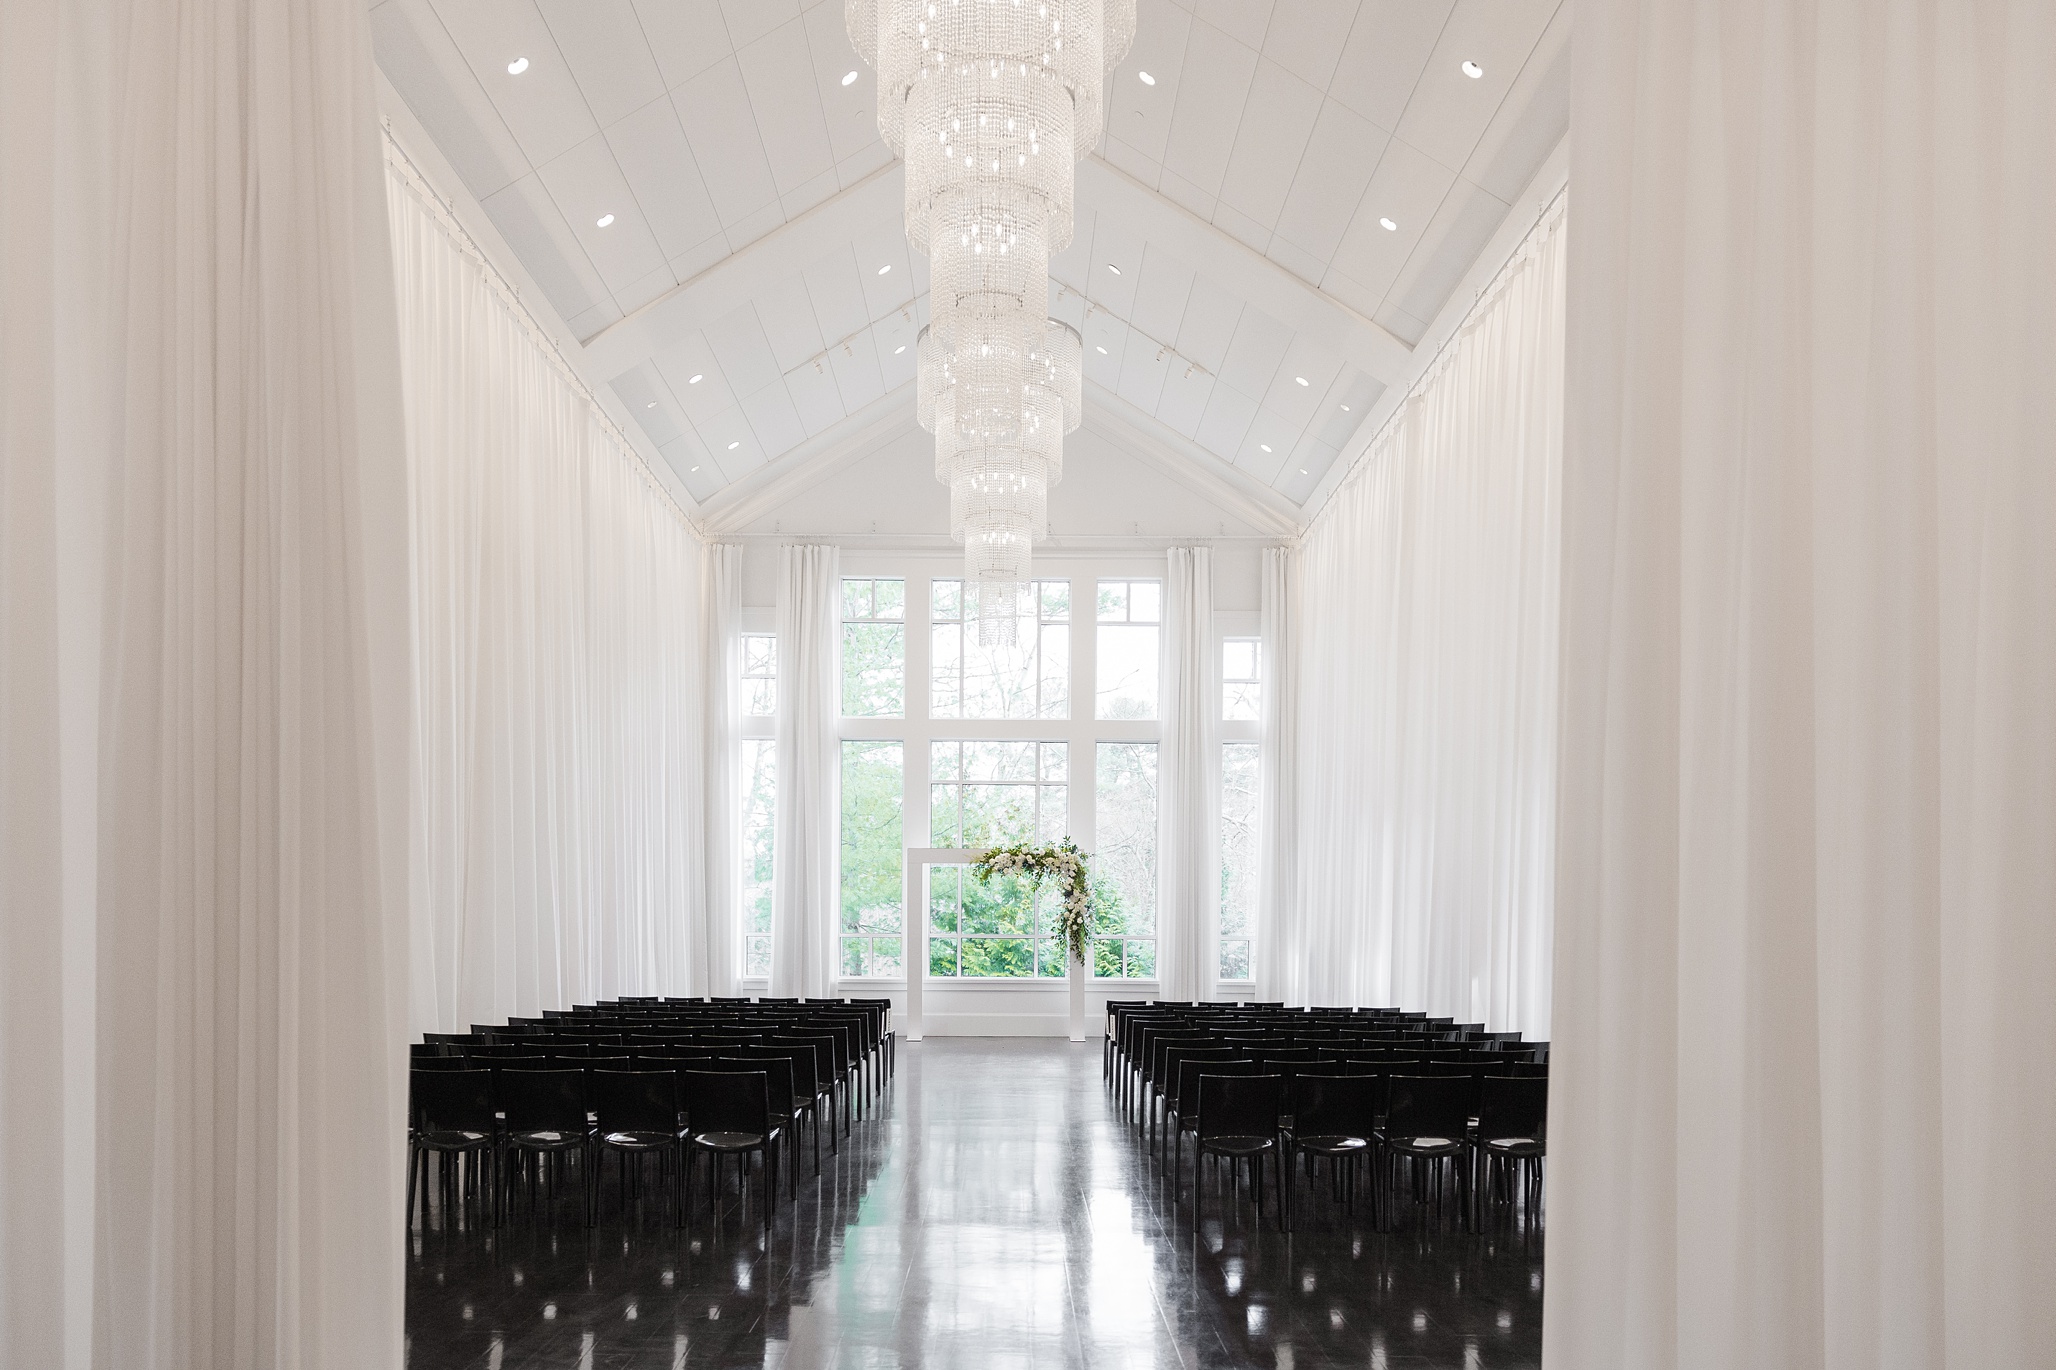 Lakeview Pavilion Wedding Photographer and Videographer Team, elegant venue with high ceilings and big chandeliers in Boston's south shore.